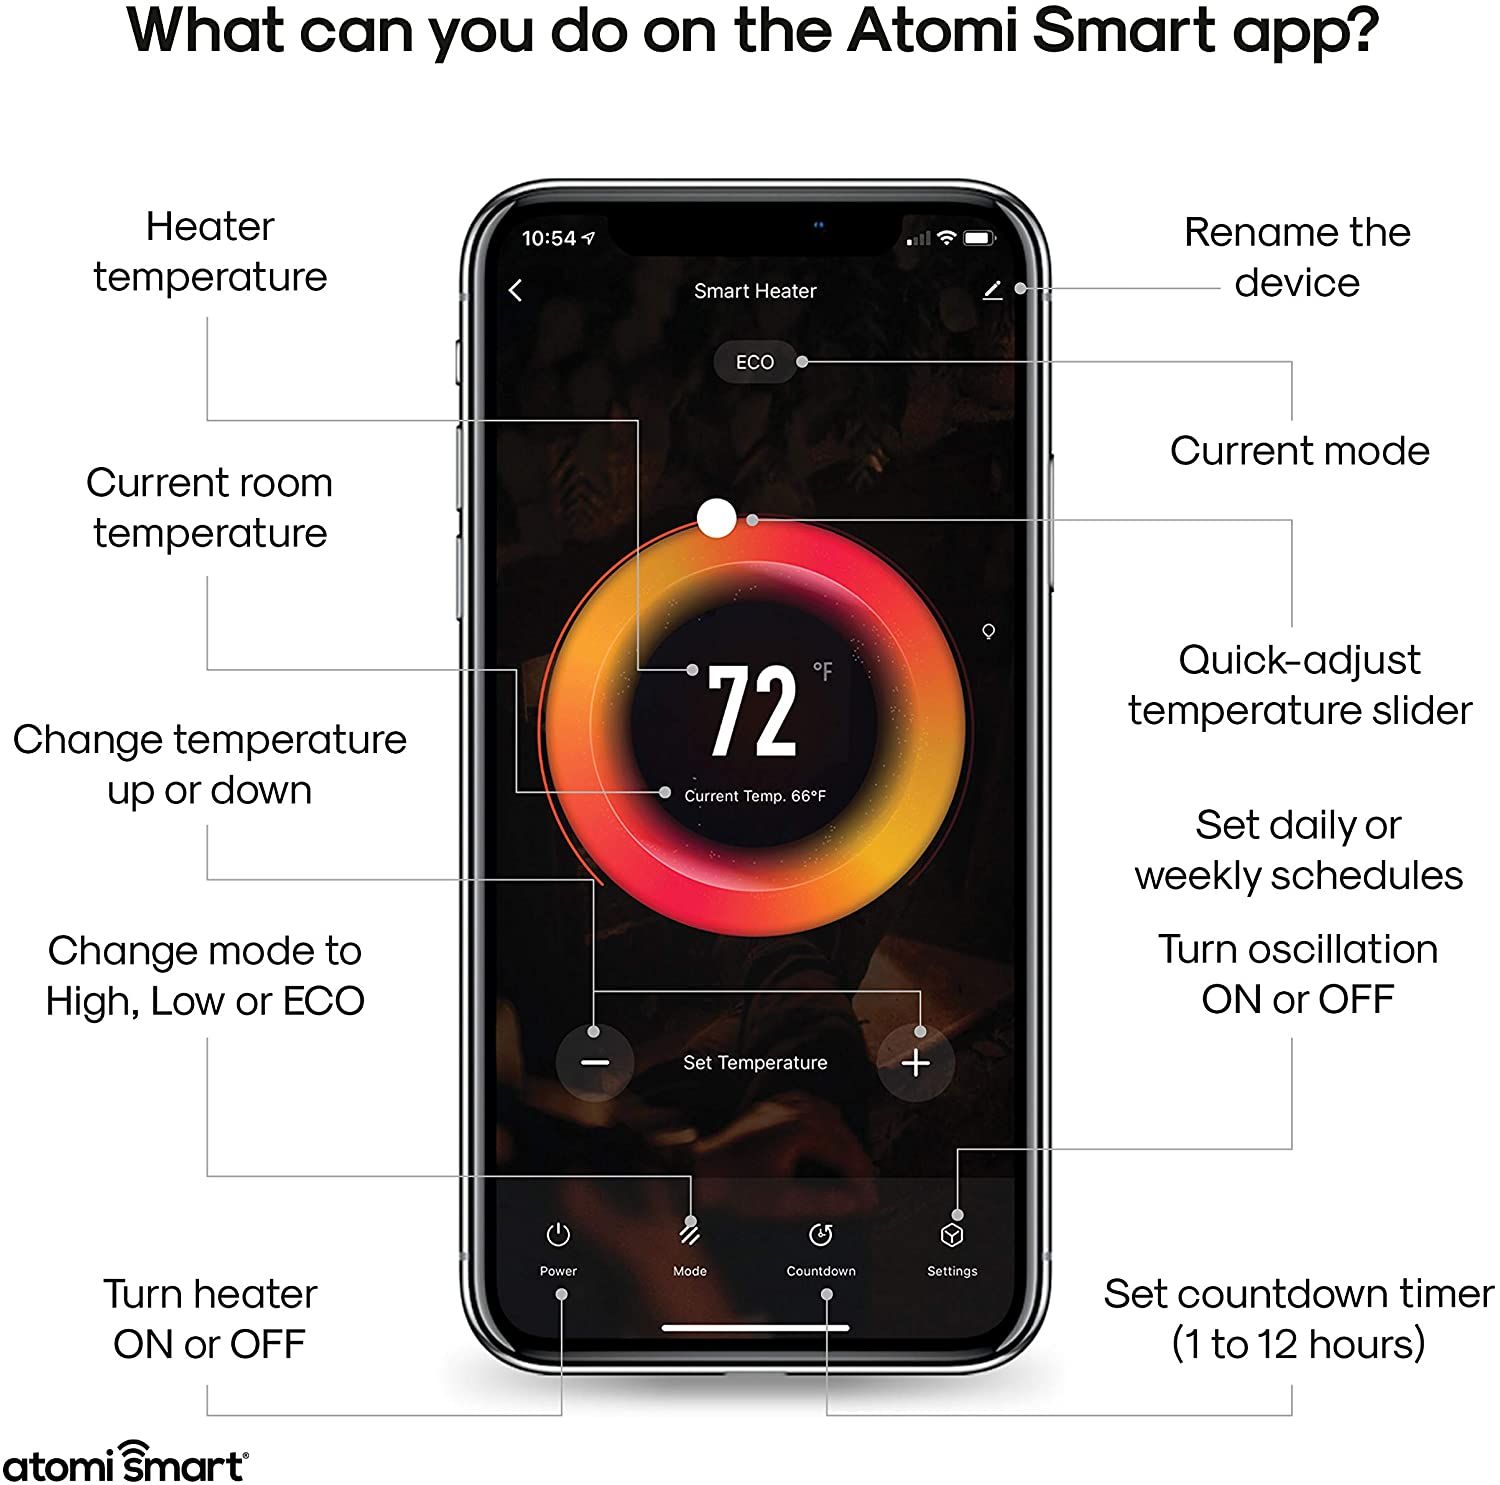 An image showing the mobile app control features of Atomi portable space heater